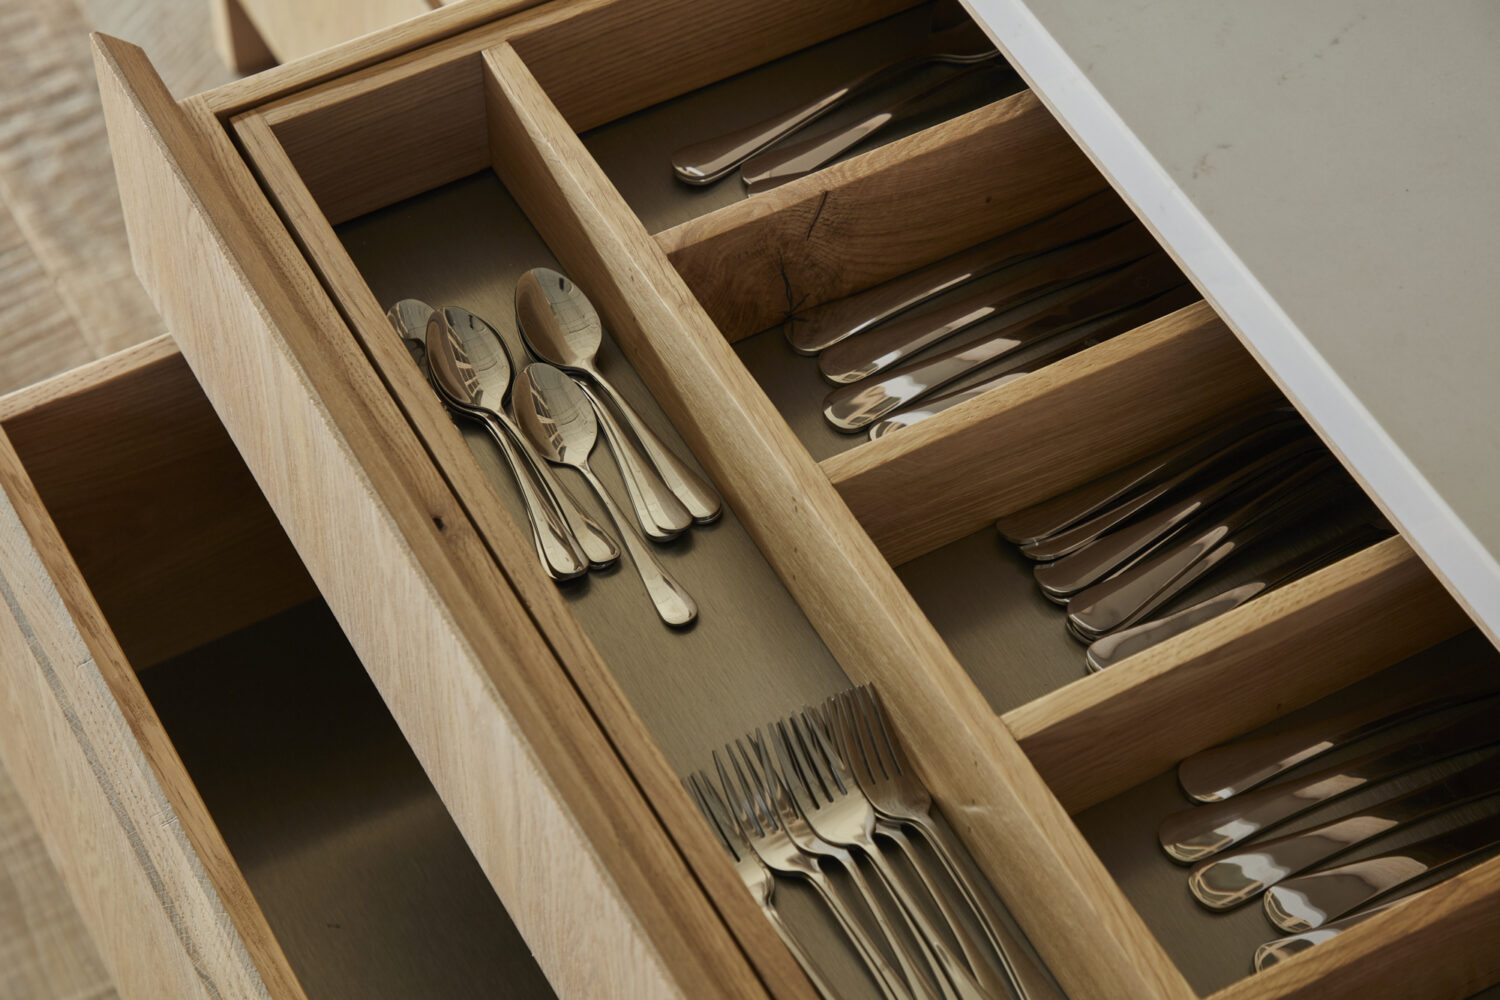 collaboration display kitchen located in London: close up of bespoke draws